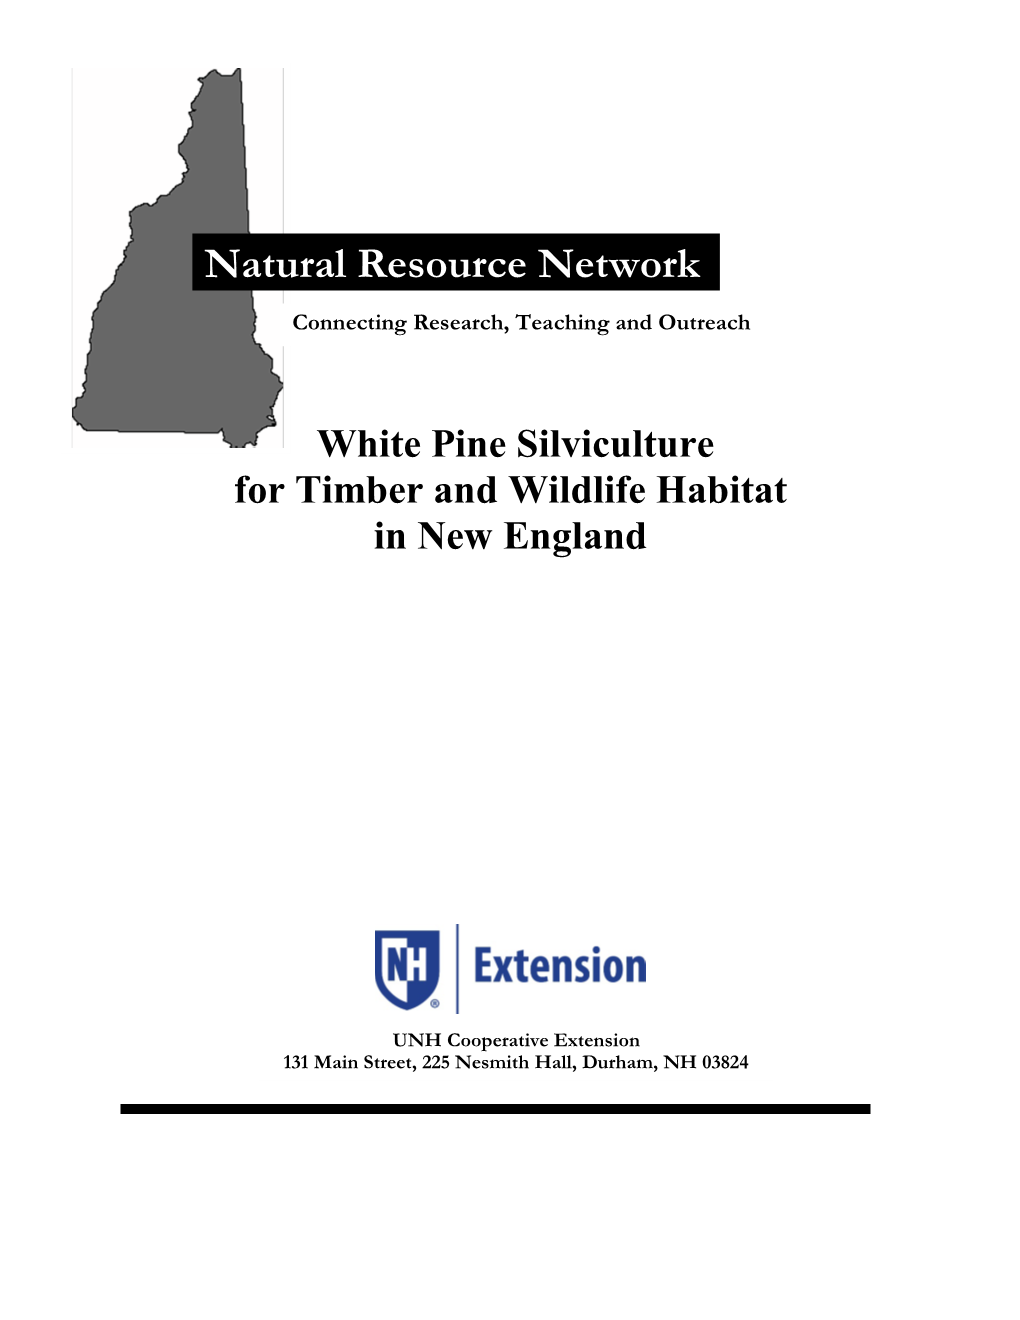 White Pine Silviculture for Timber and Wildlife Habitat in New England